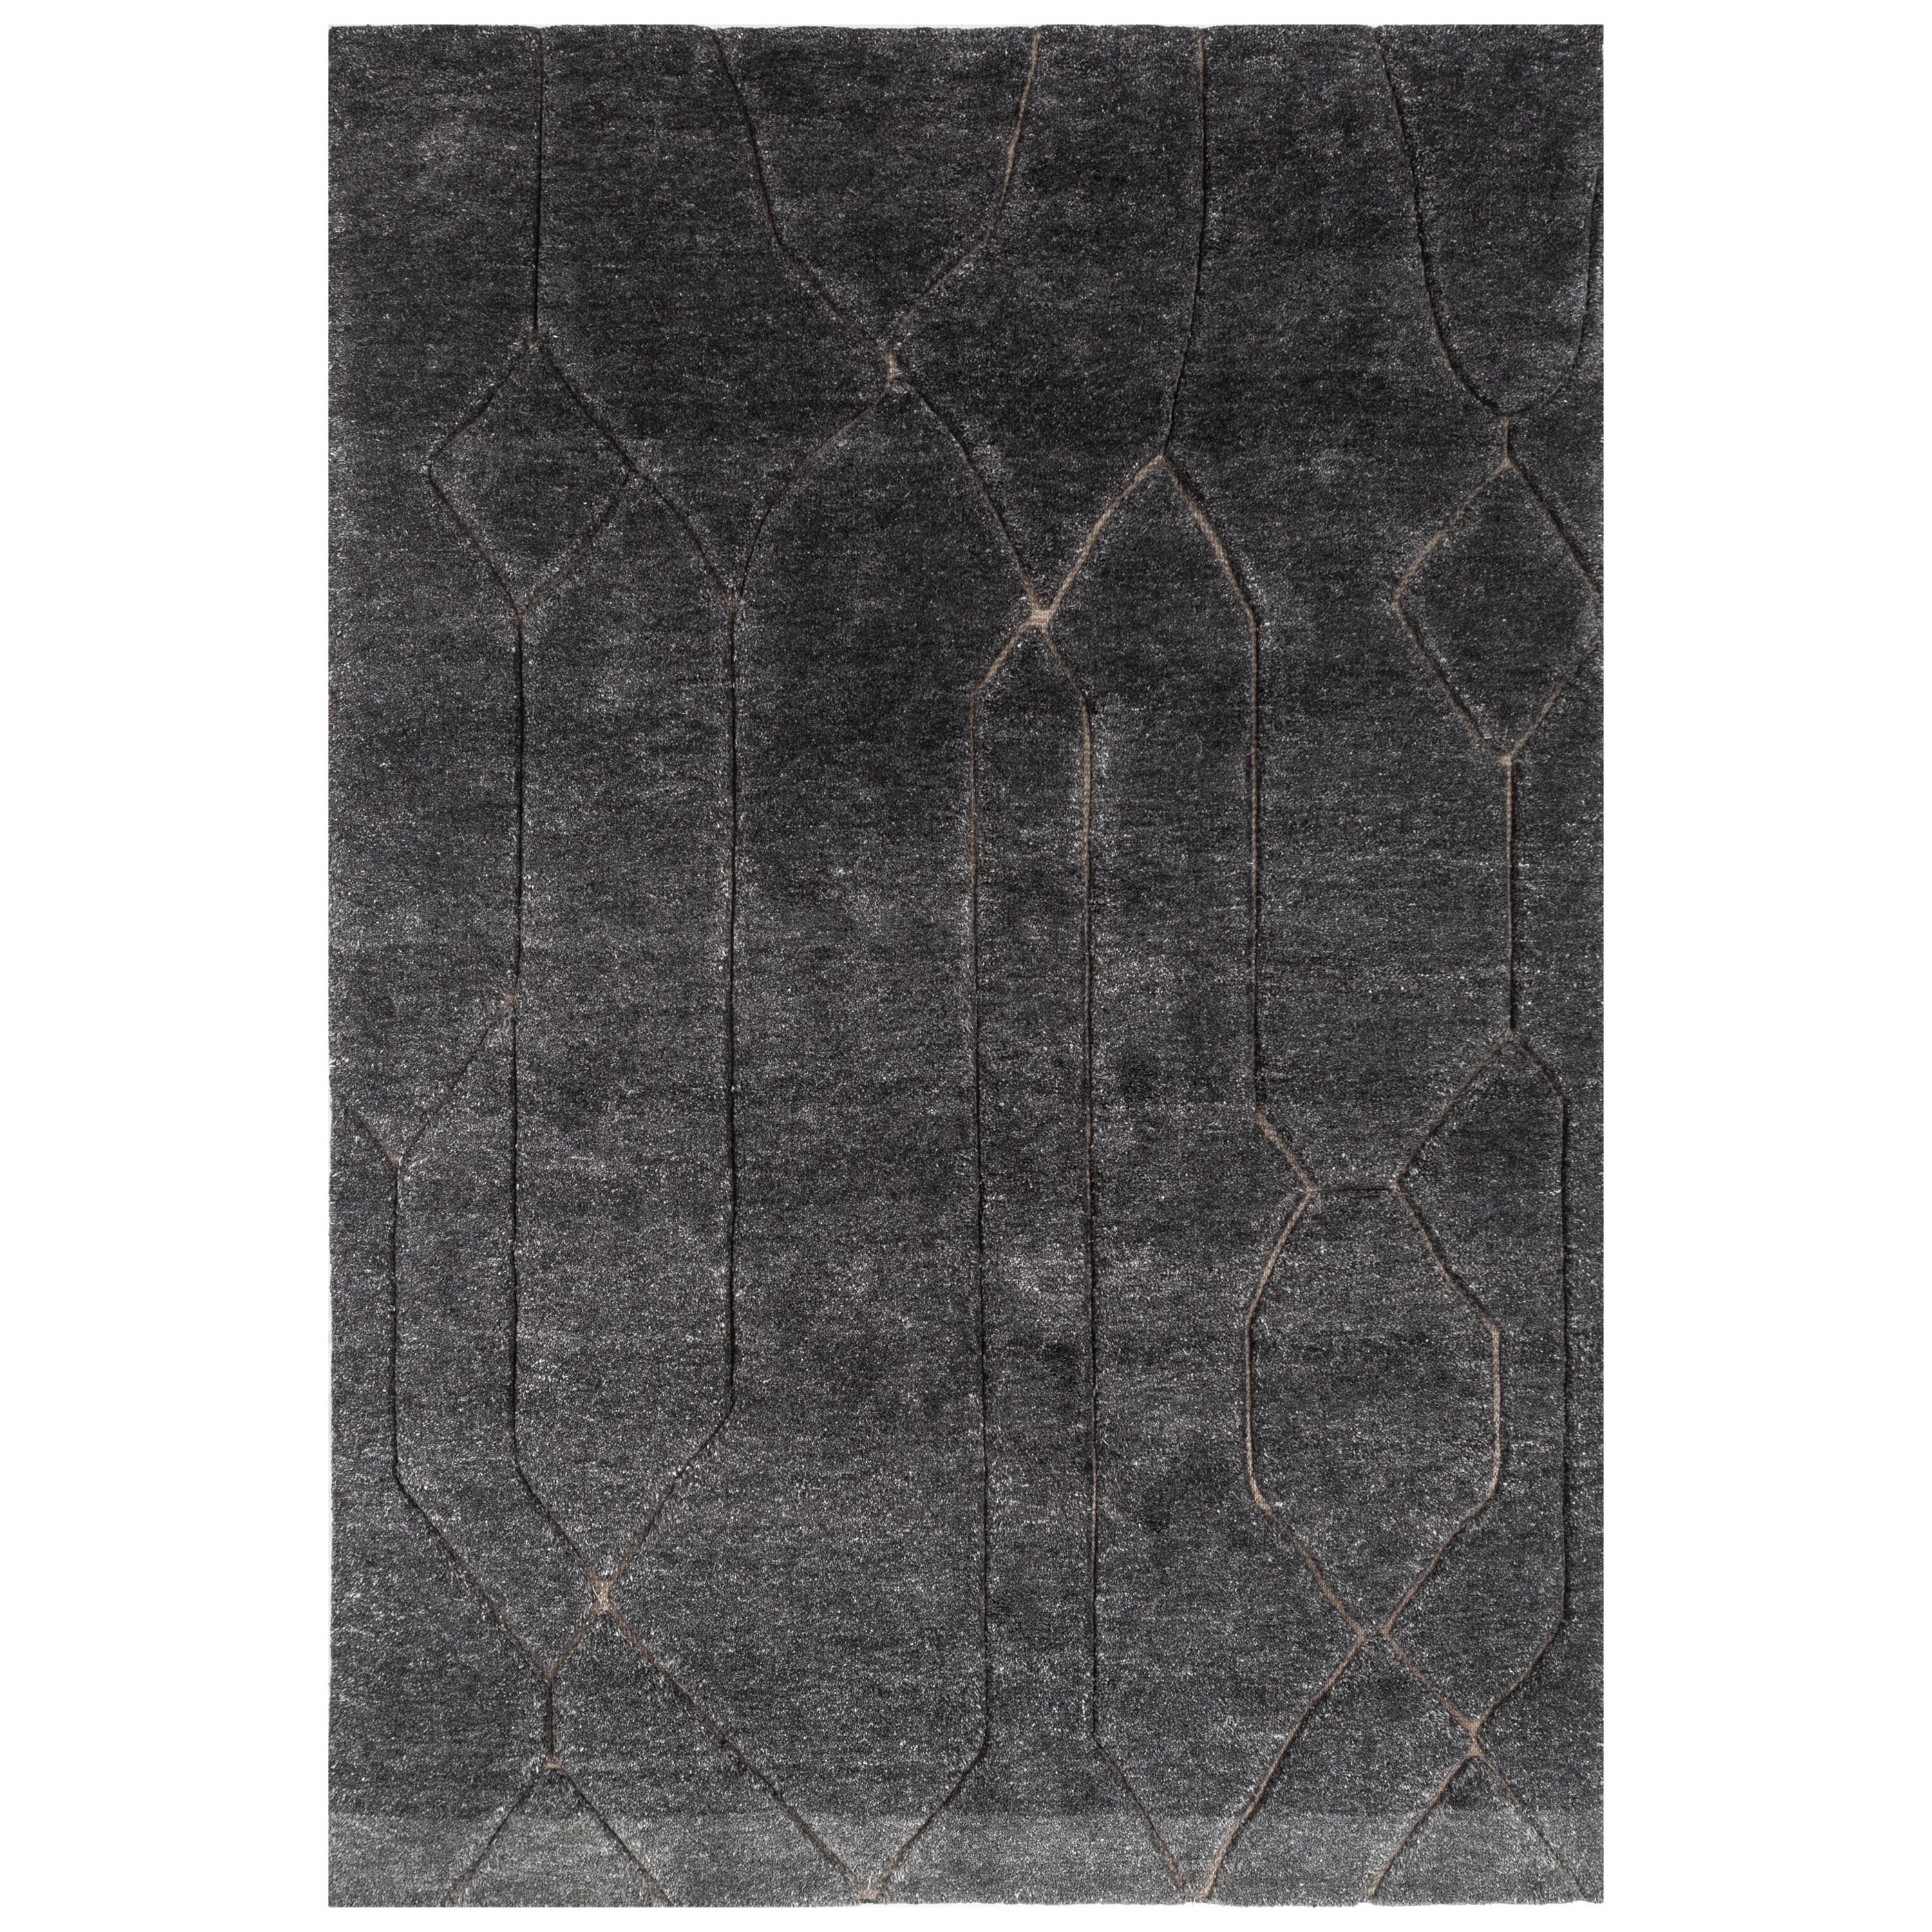 Mellow Hues Caviar & Medium Gray 180X270 cm Handknotted Rug For Sale